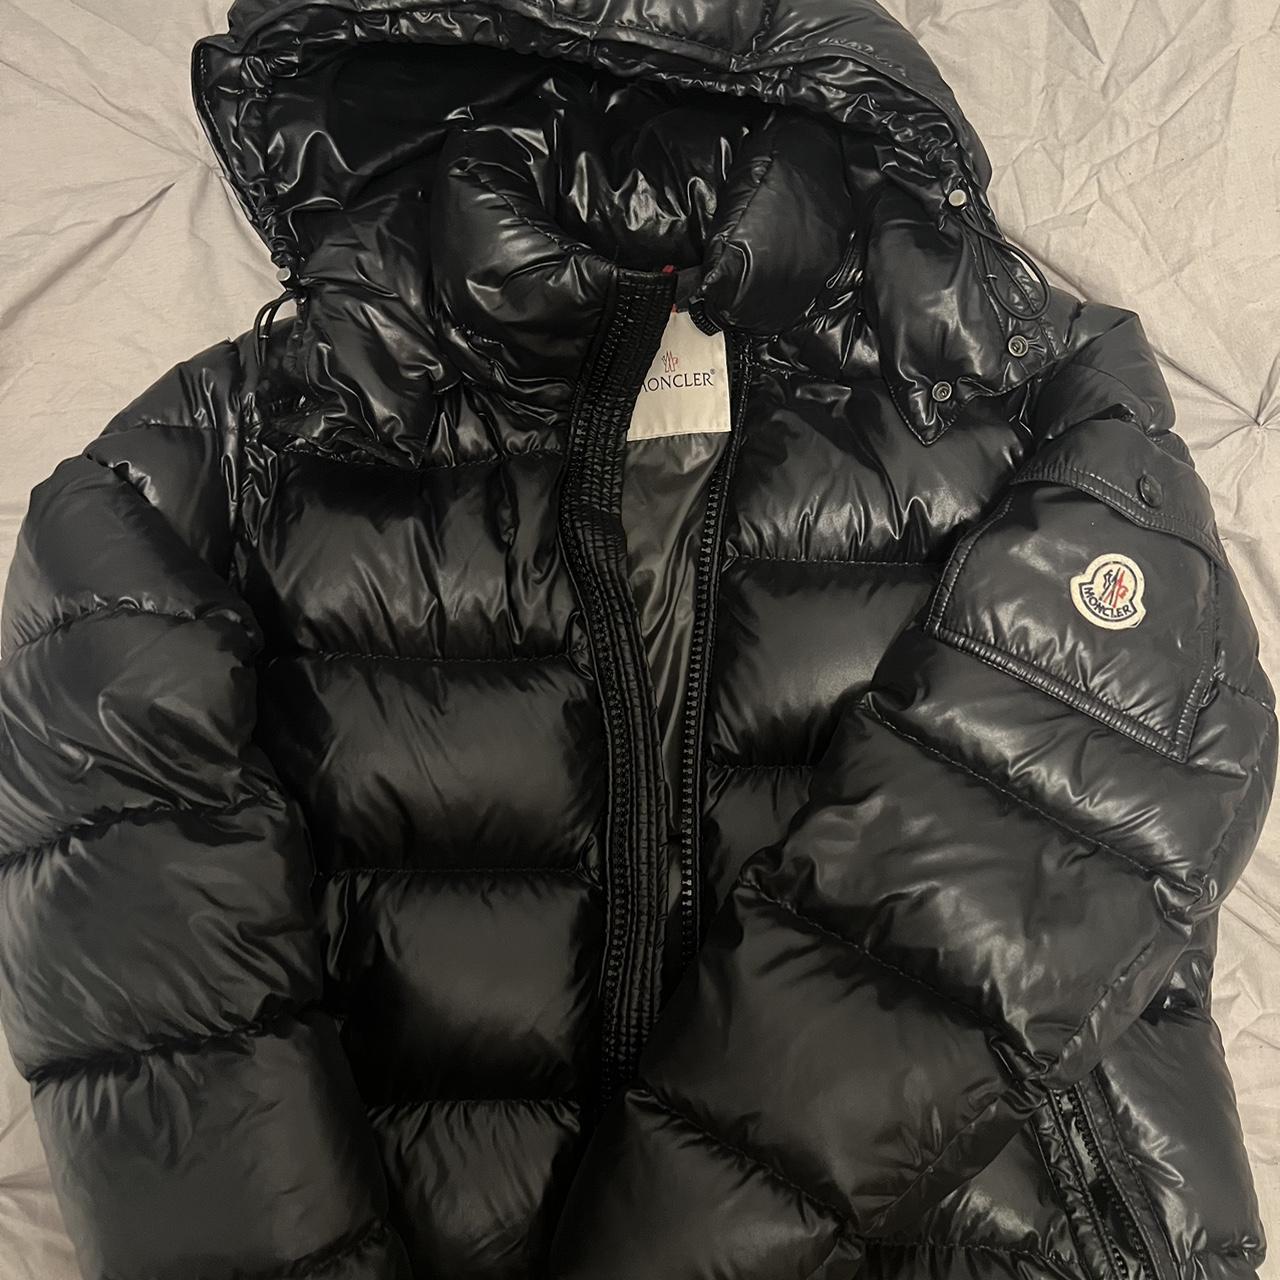 Moncler Maya 100% authentic Size 2 which is a... - Depop